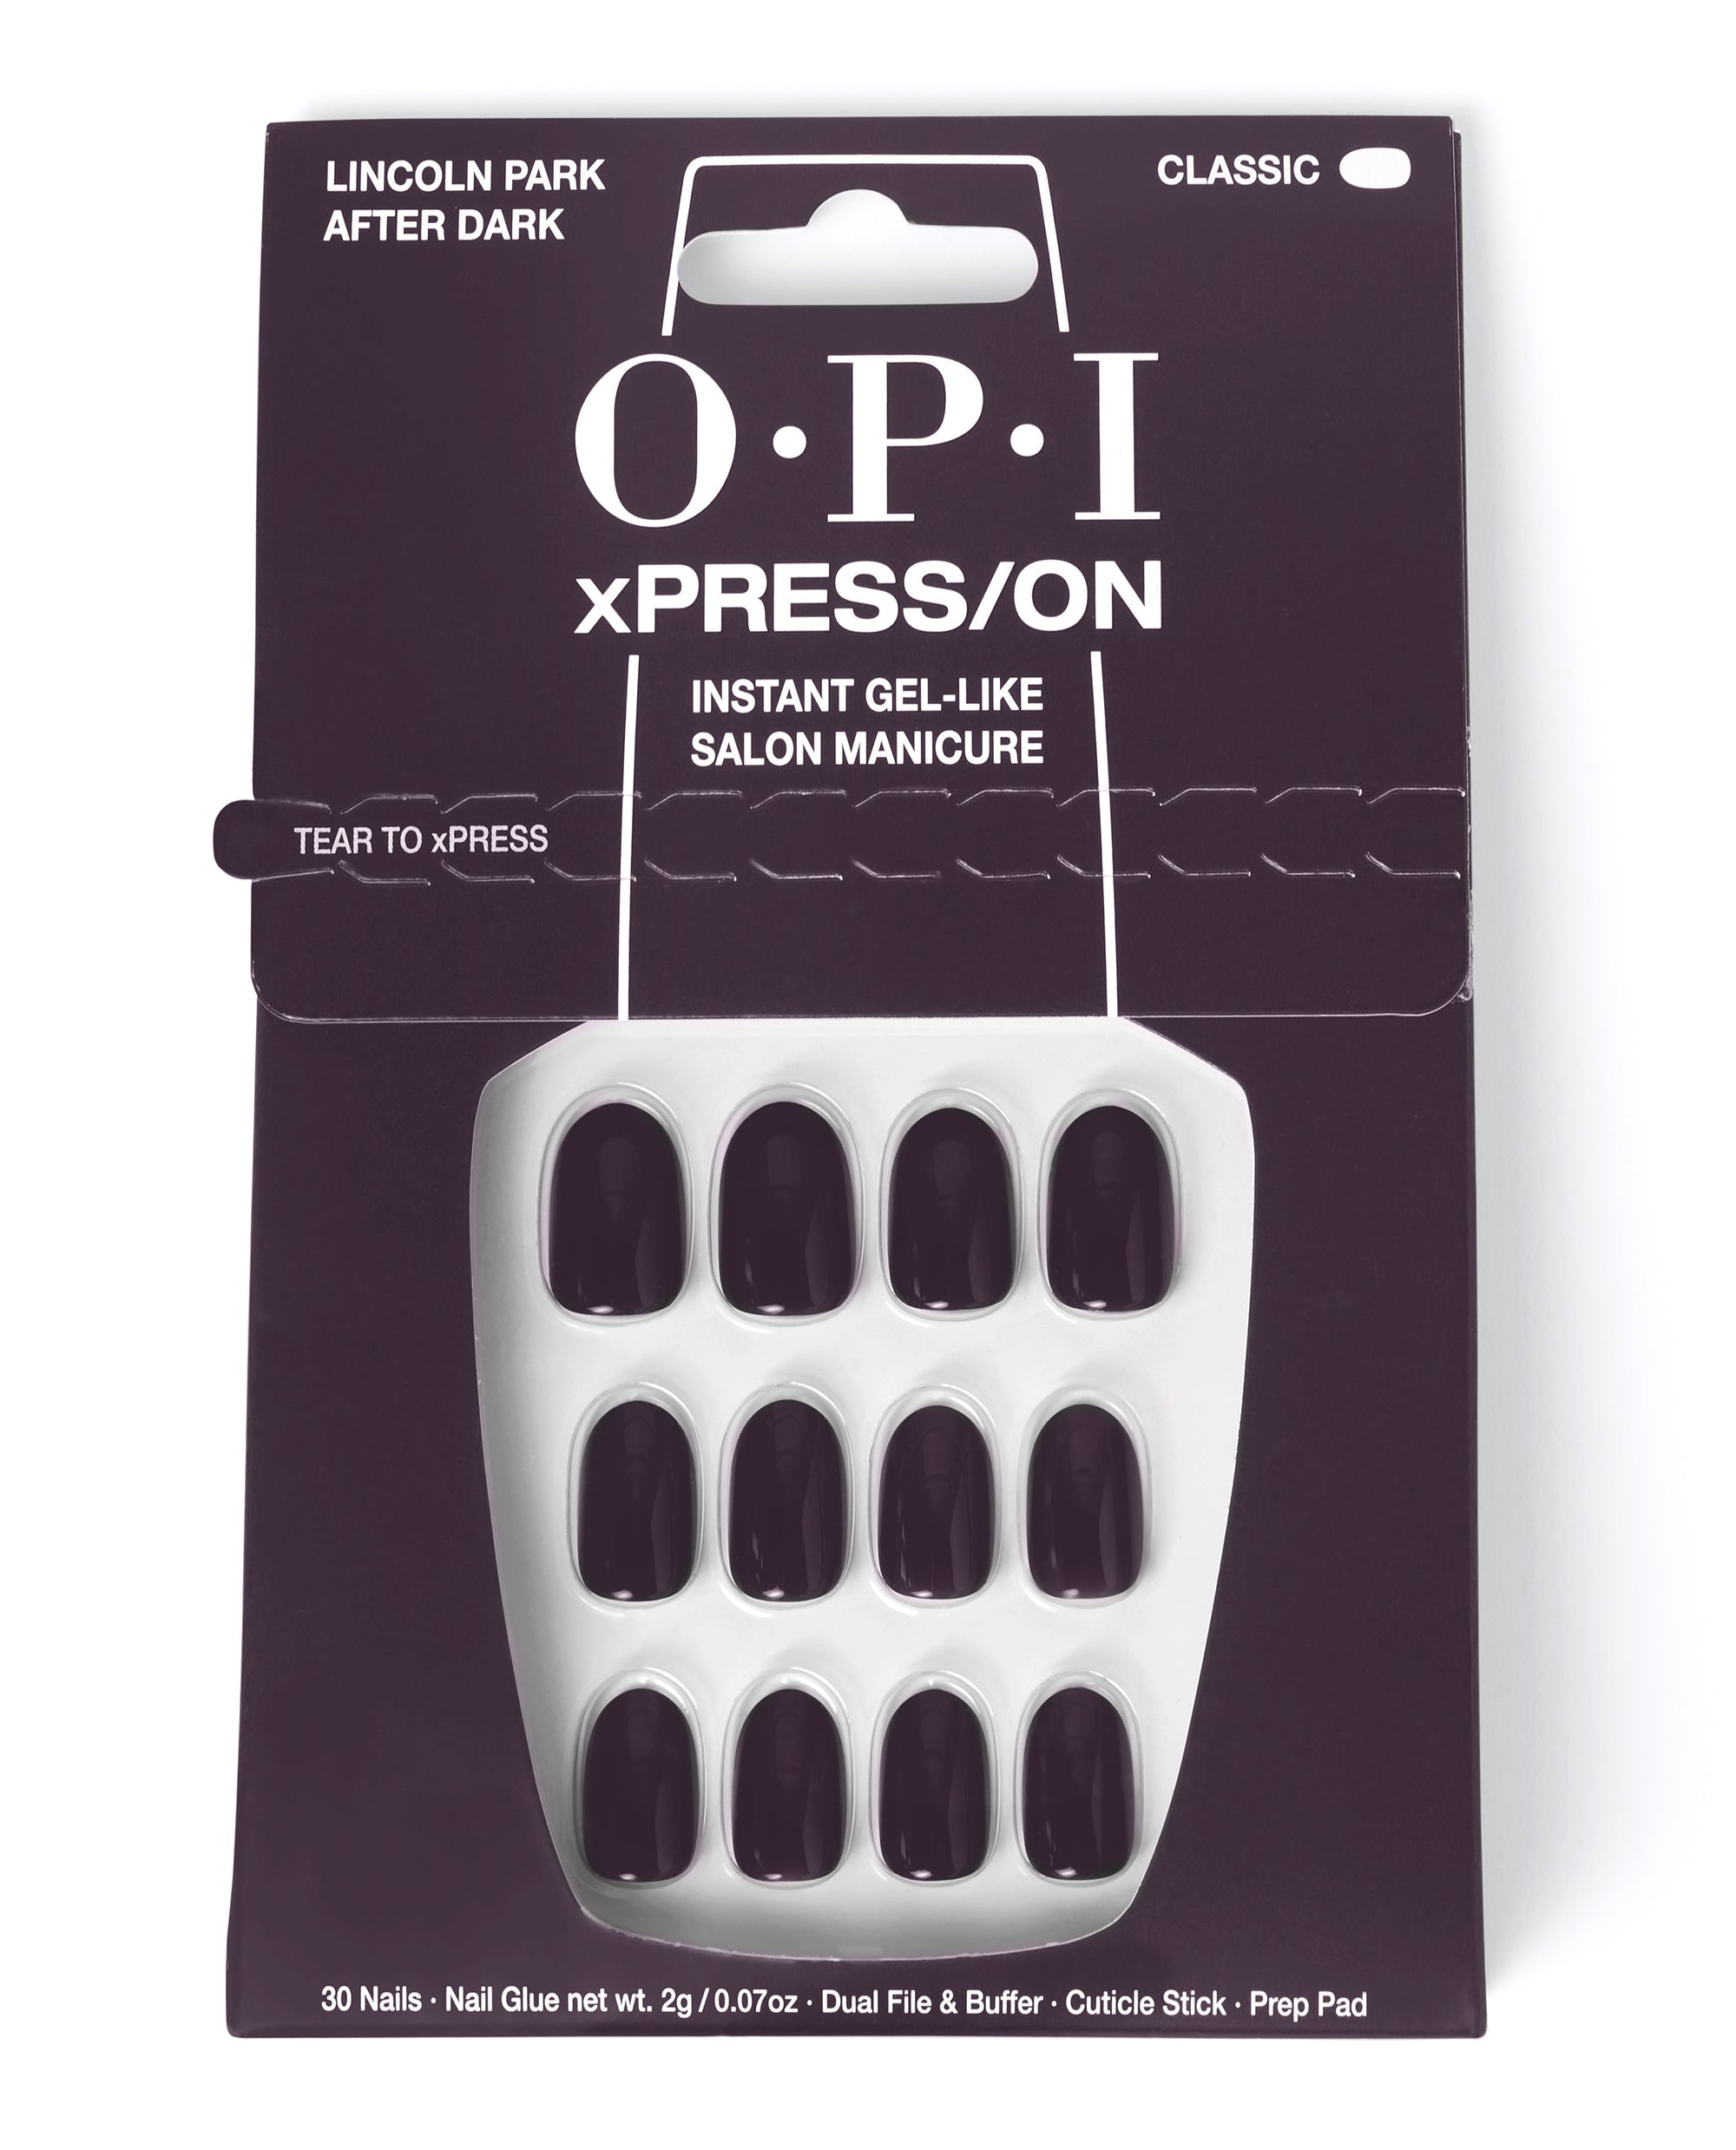 OPI Lincoln Park After Dark xPRESS/ON Iconic Shades (Short) xPRESS/ON